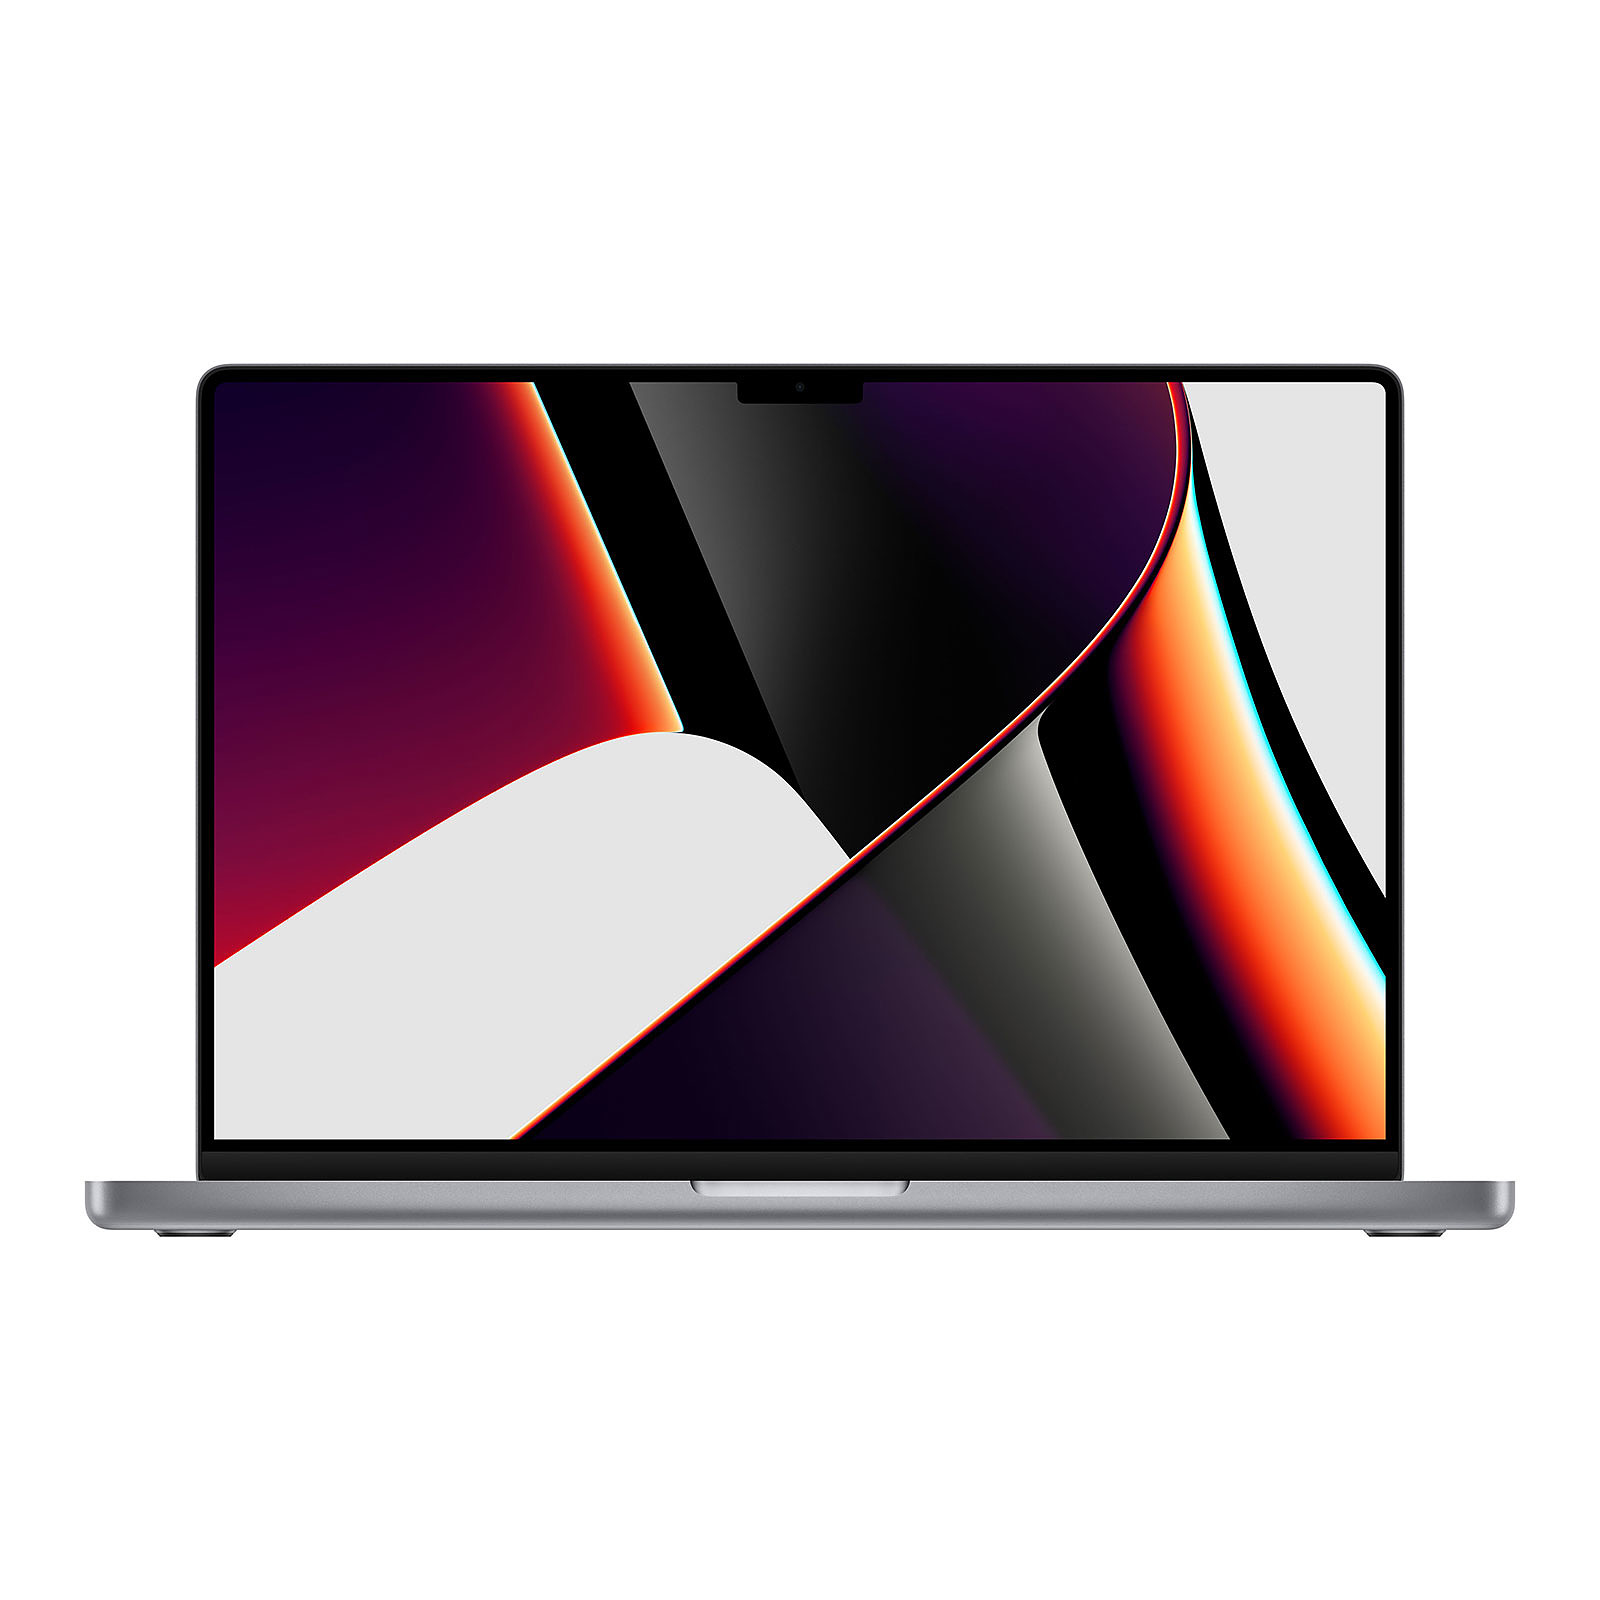 Apple MacBook Pro M1 Pro (2021) 16" Gris sideral 16Go/2To (MK183FN/A-SS2T) - MacBook Apple